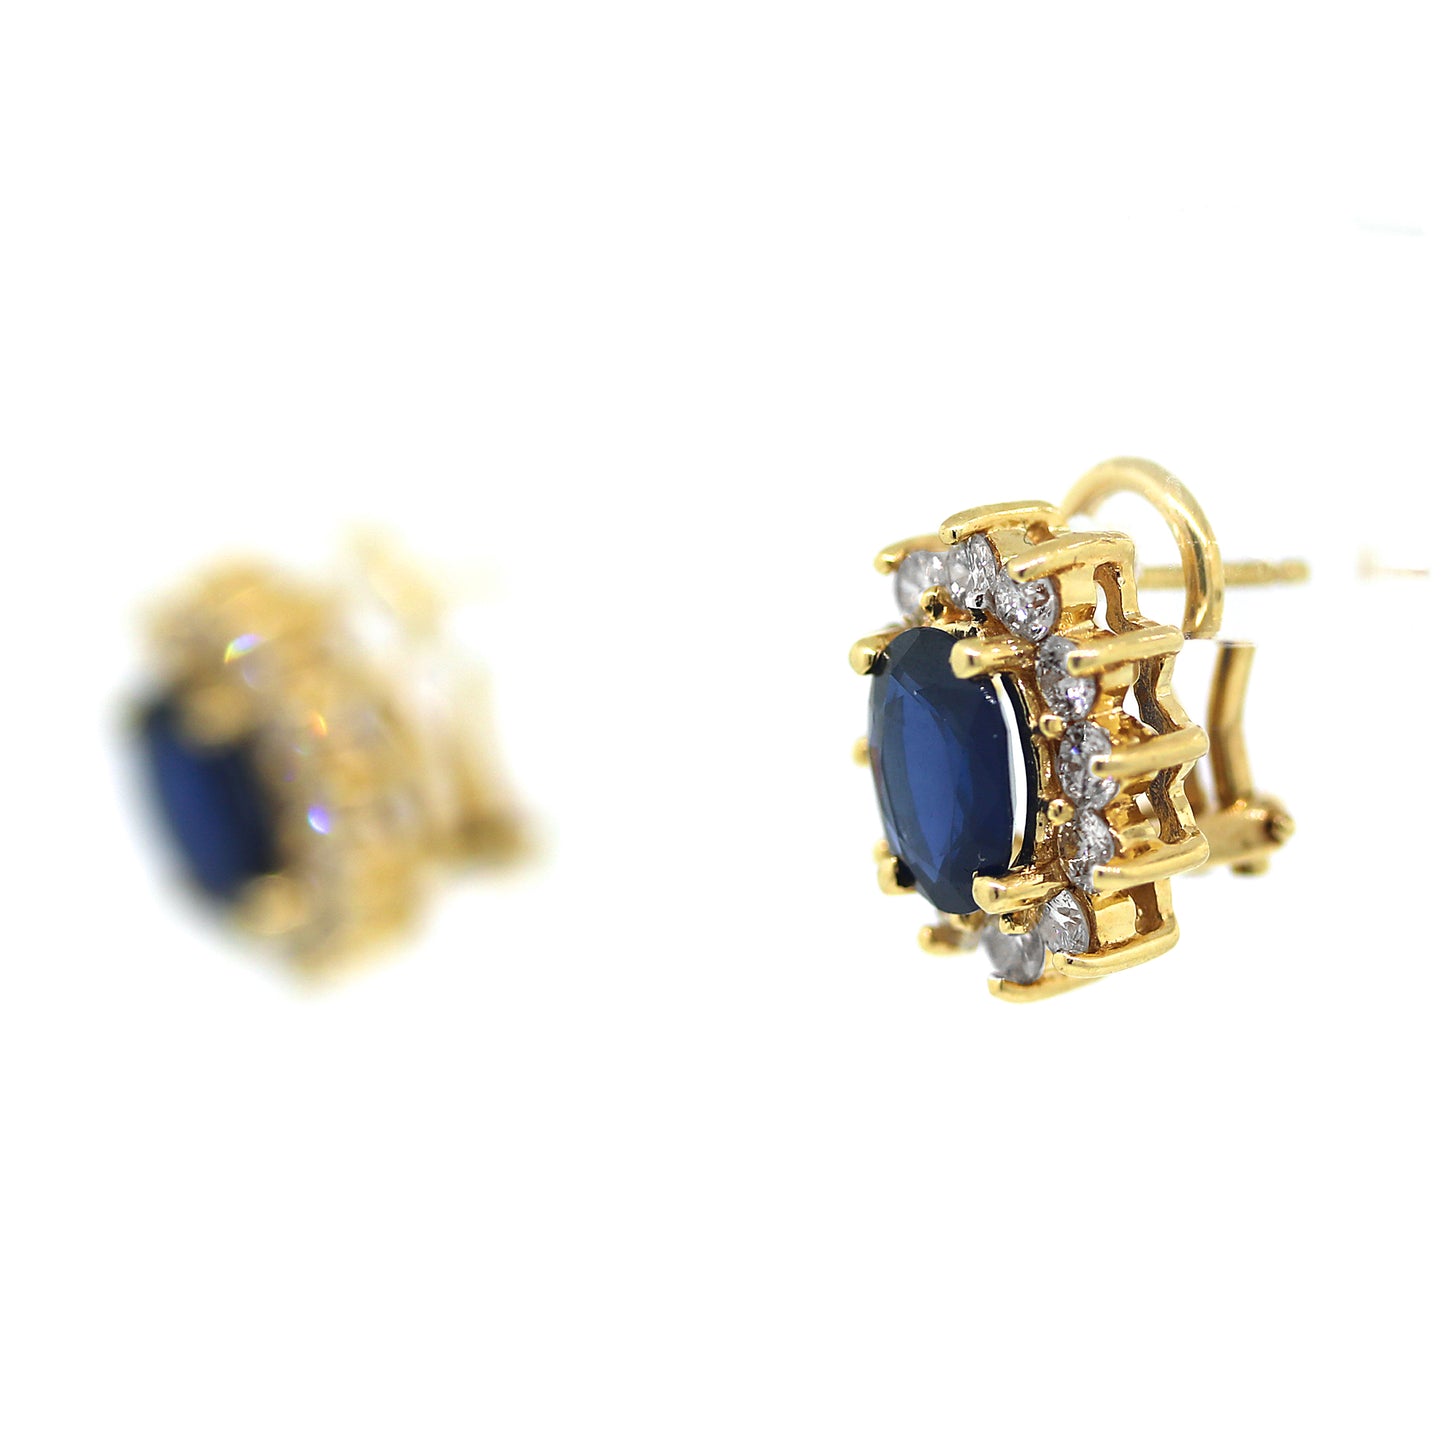 Blue Sapphire and Diamond Cluster Earrings